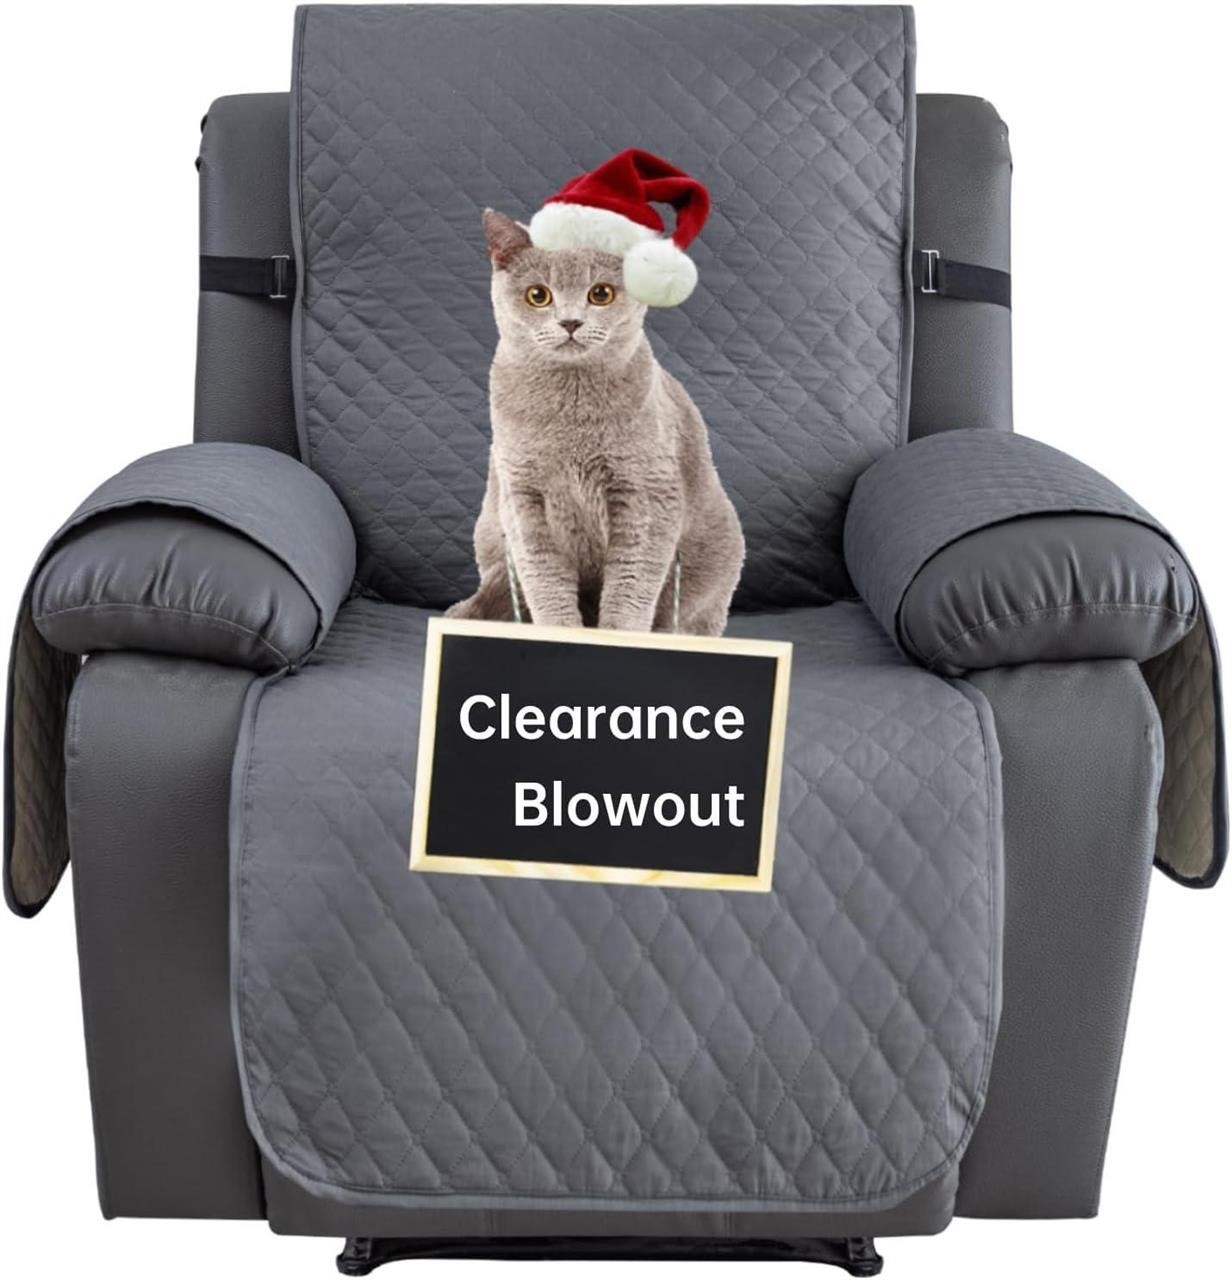 Nonslip recliner chair covers